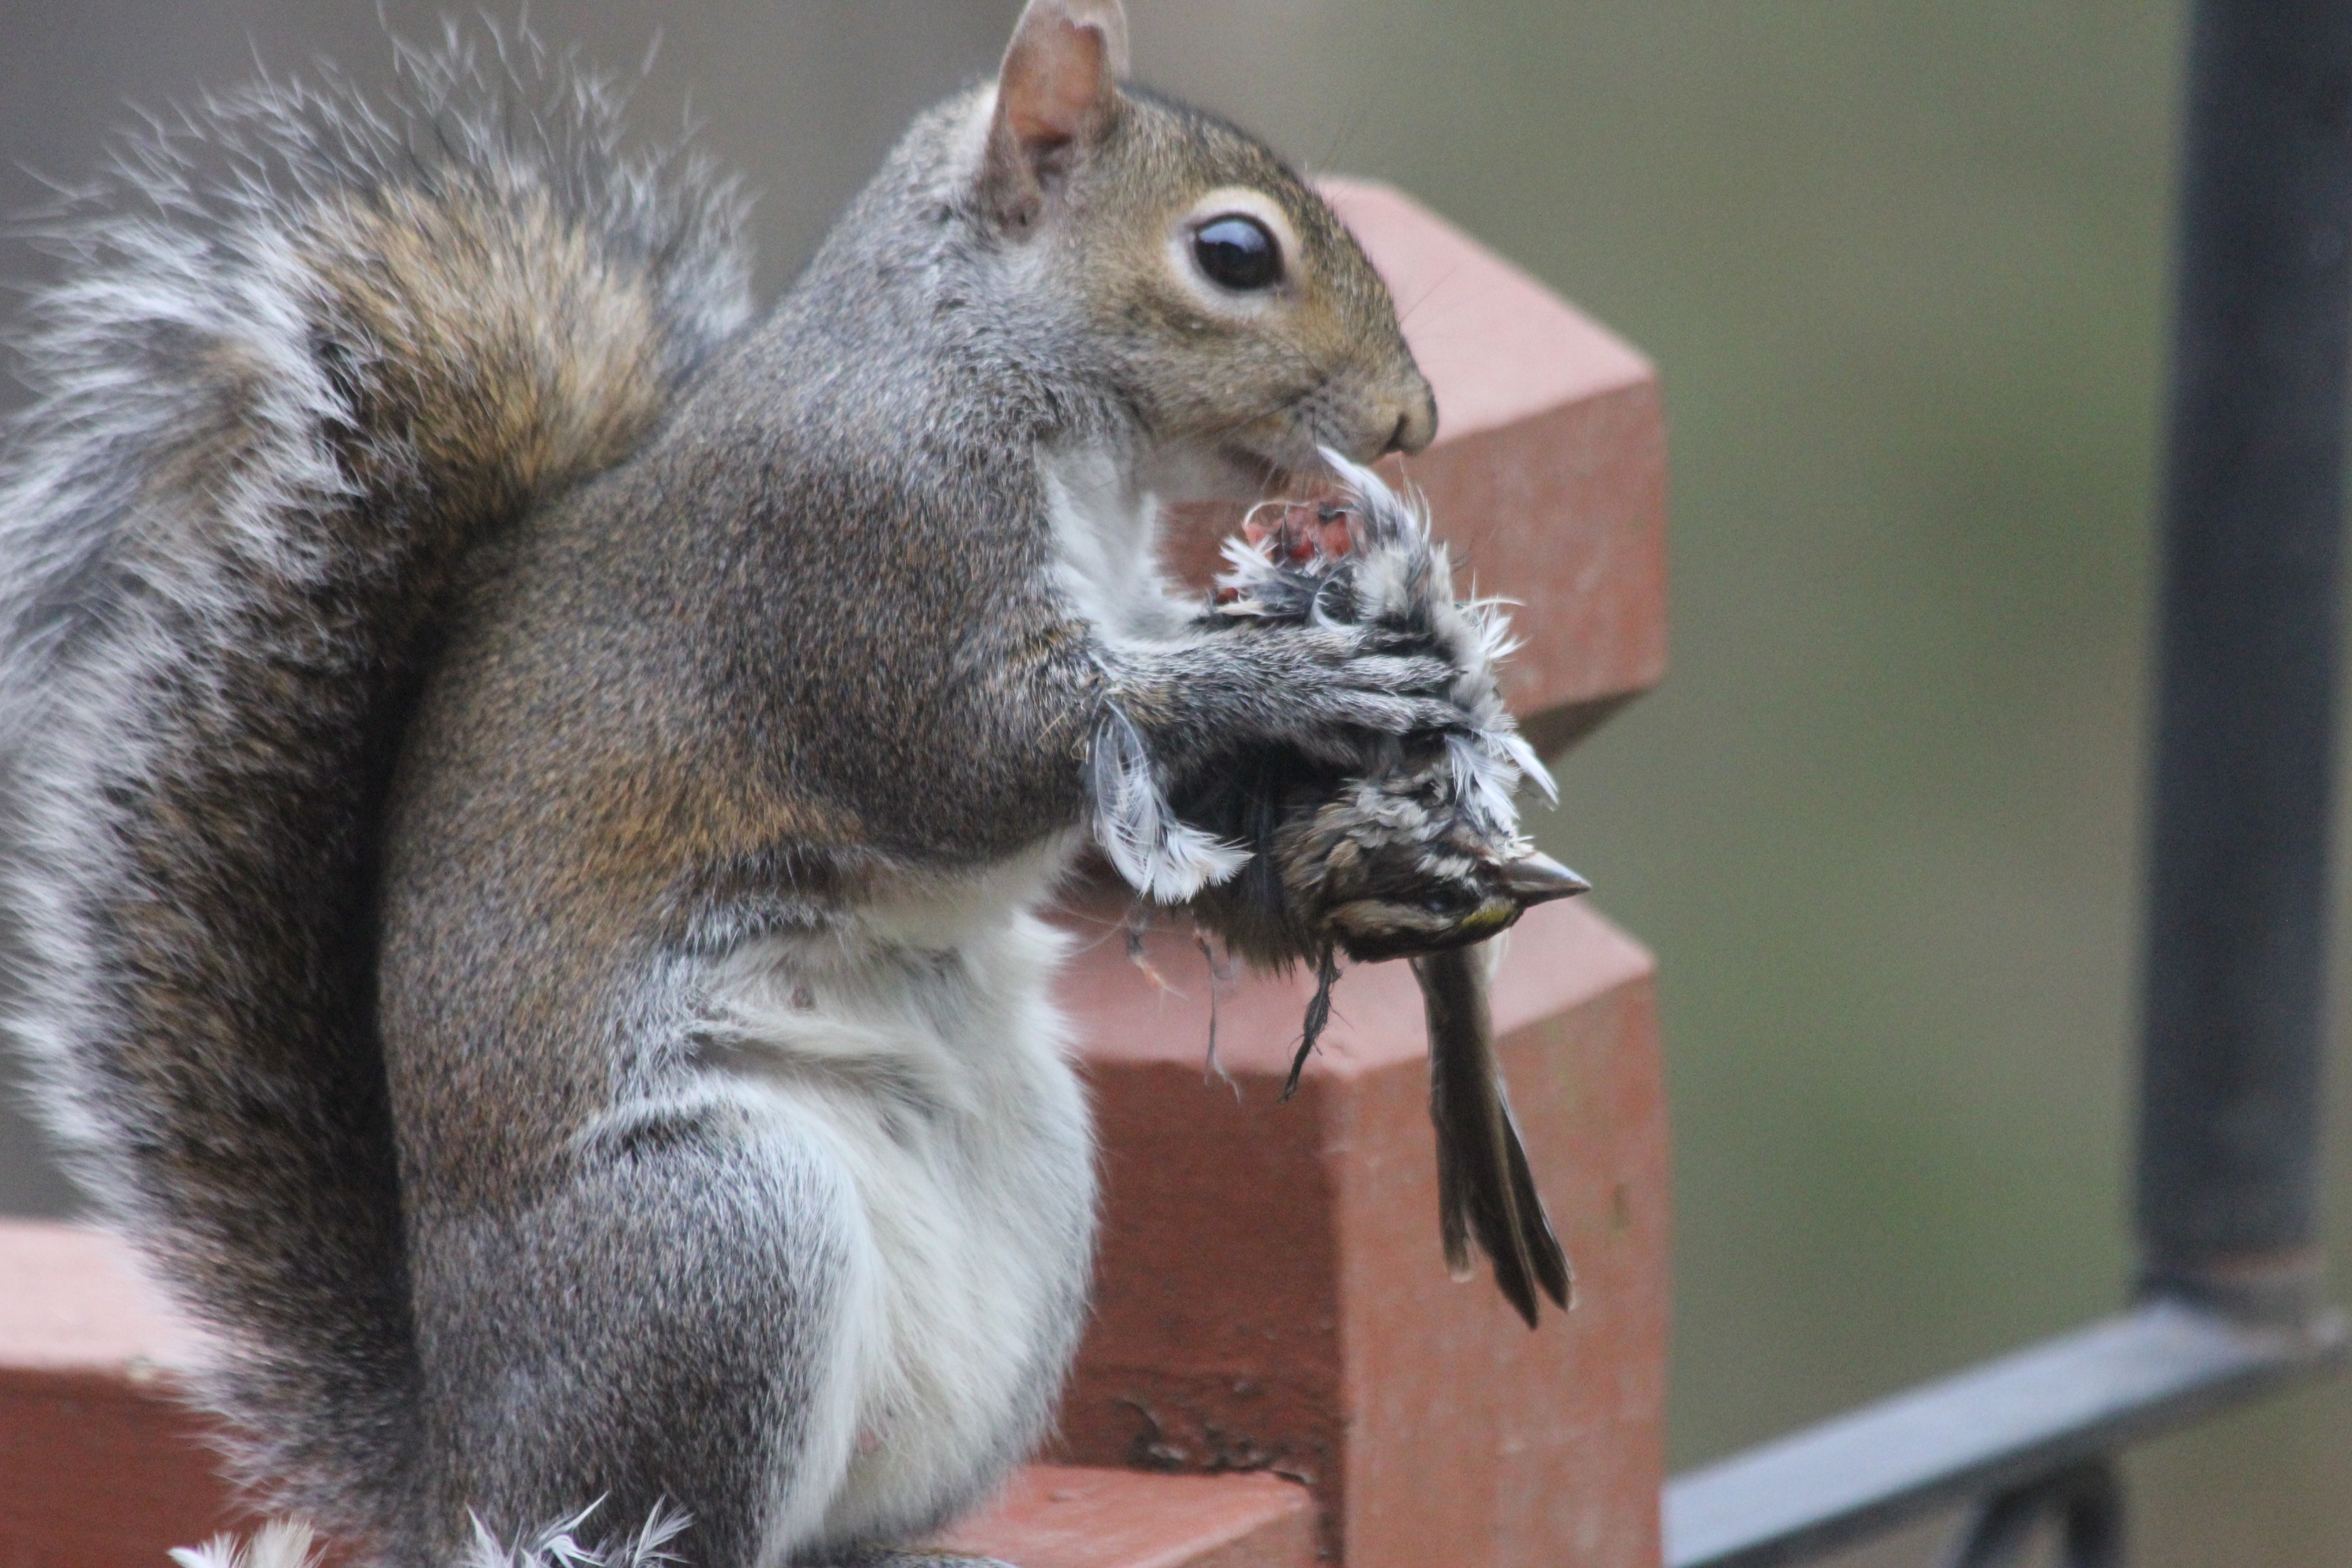 File:Squirrel eating a bird.JPG - Wikimedia Commons